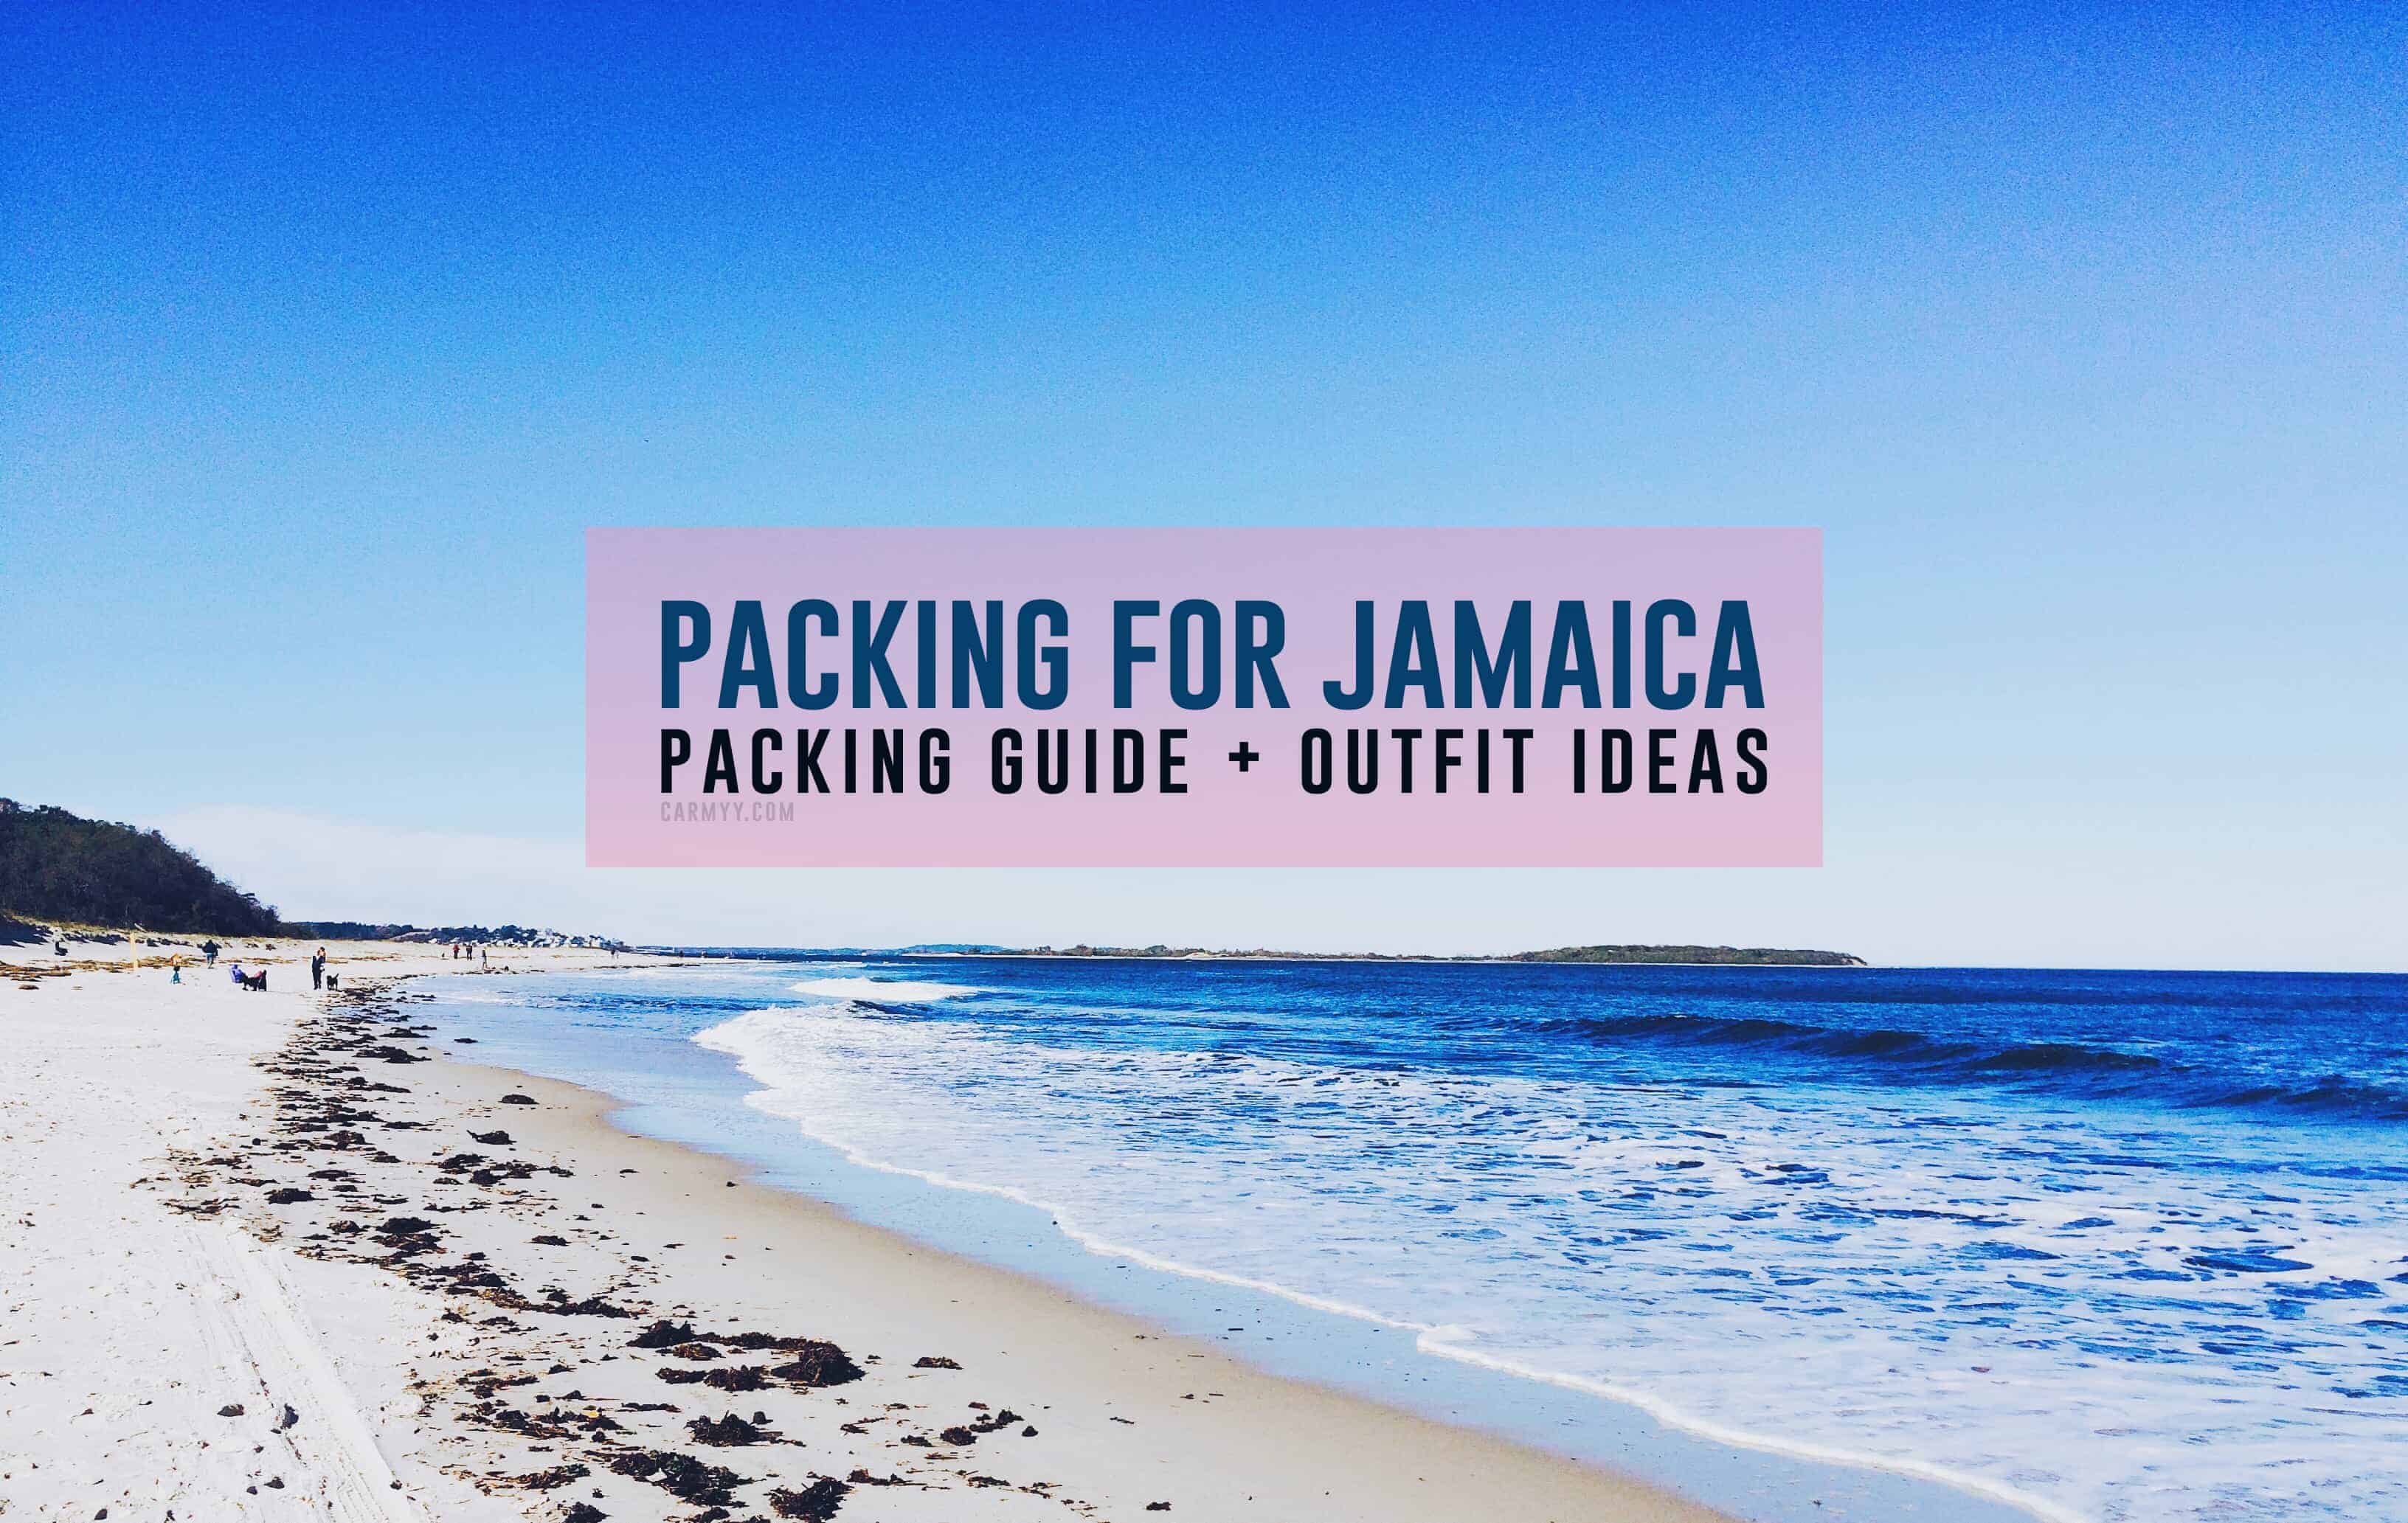 Packing for Jamaica: Packing Guide + Outfit Ideas - Carmy - Run Eat Travel3264 x 2065